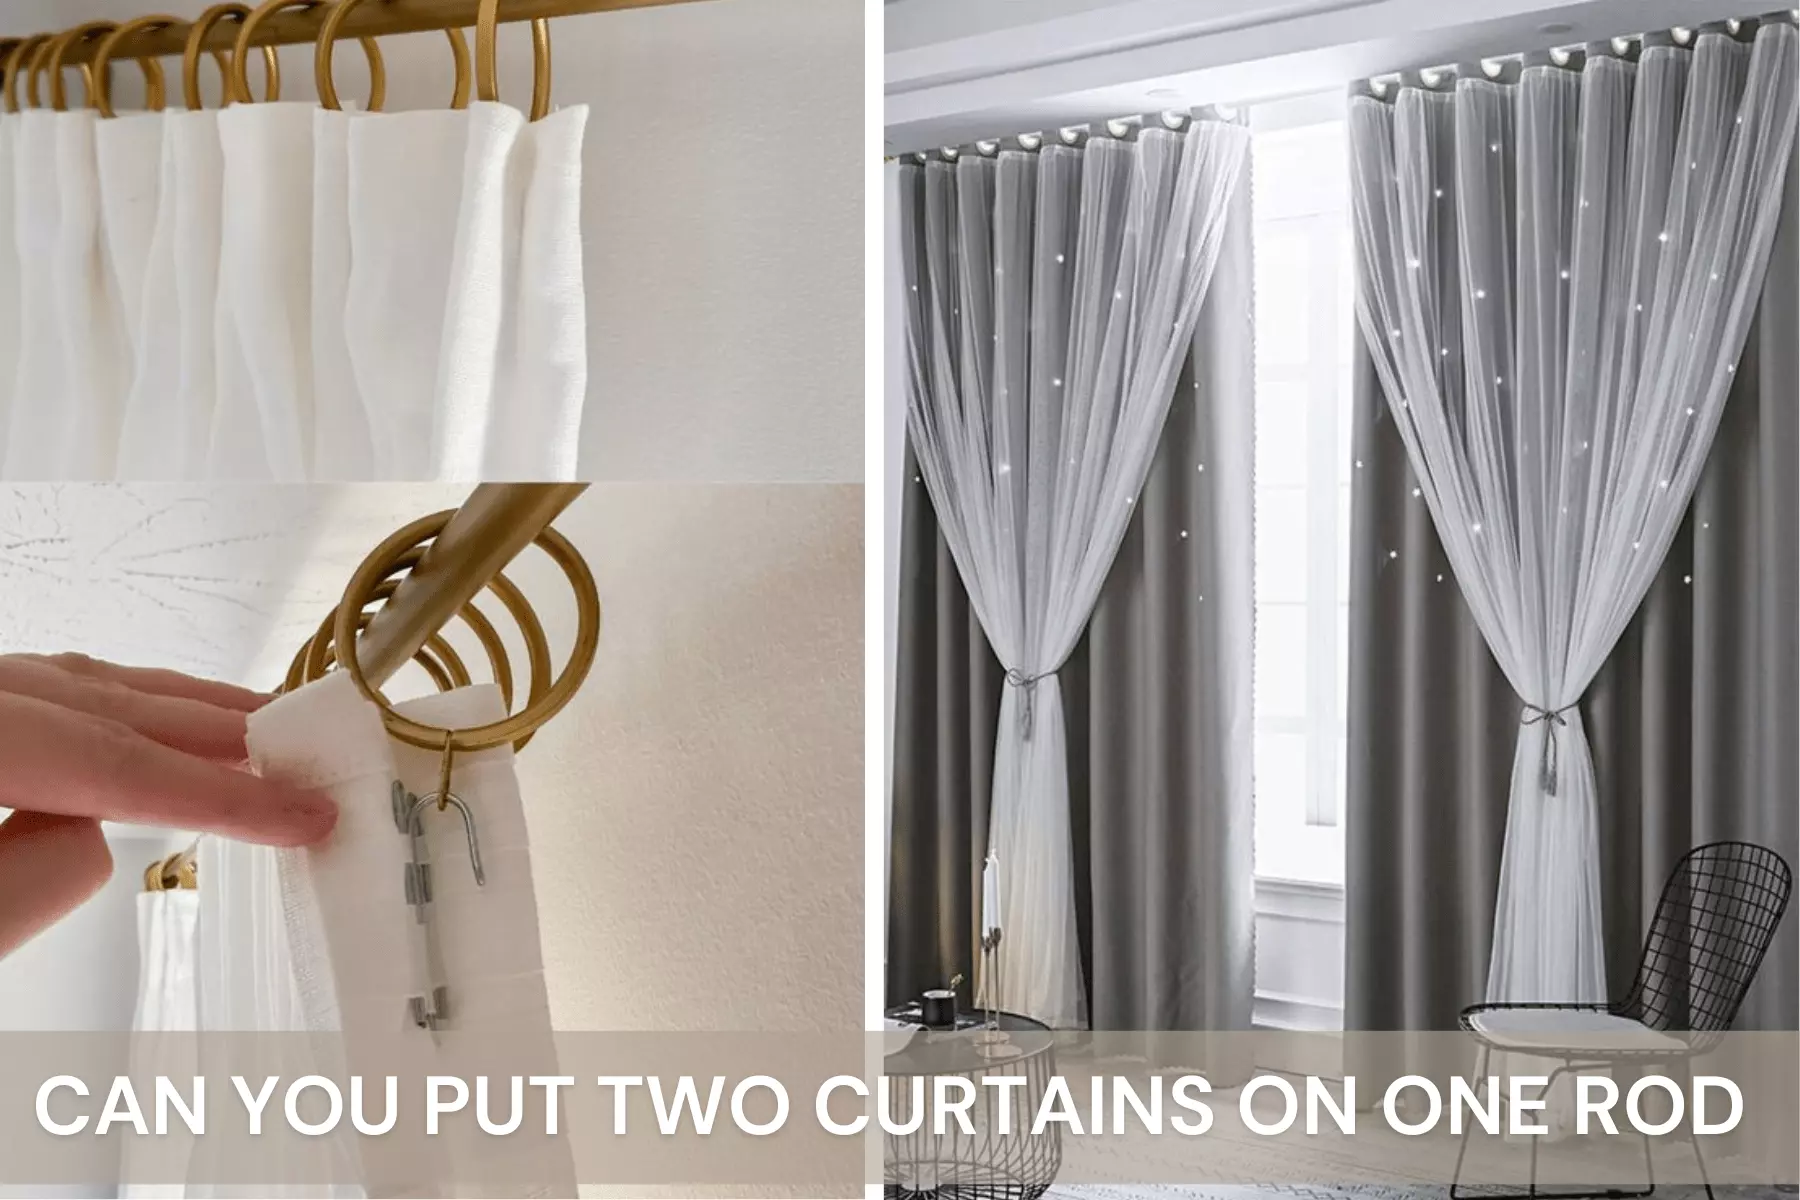 Can you put two curtains on one rod